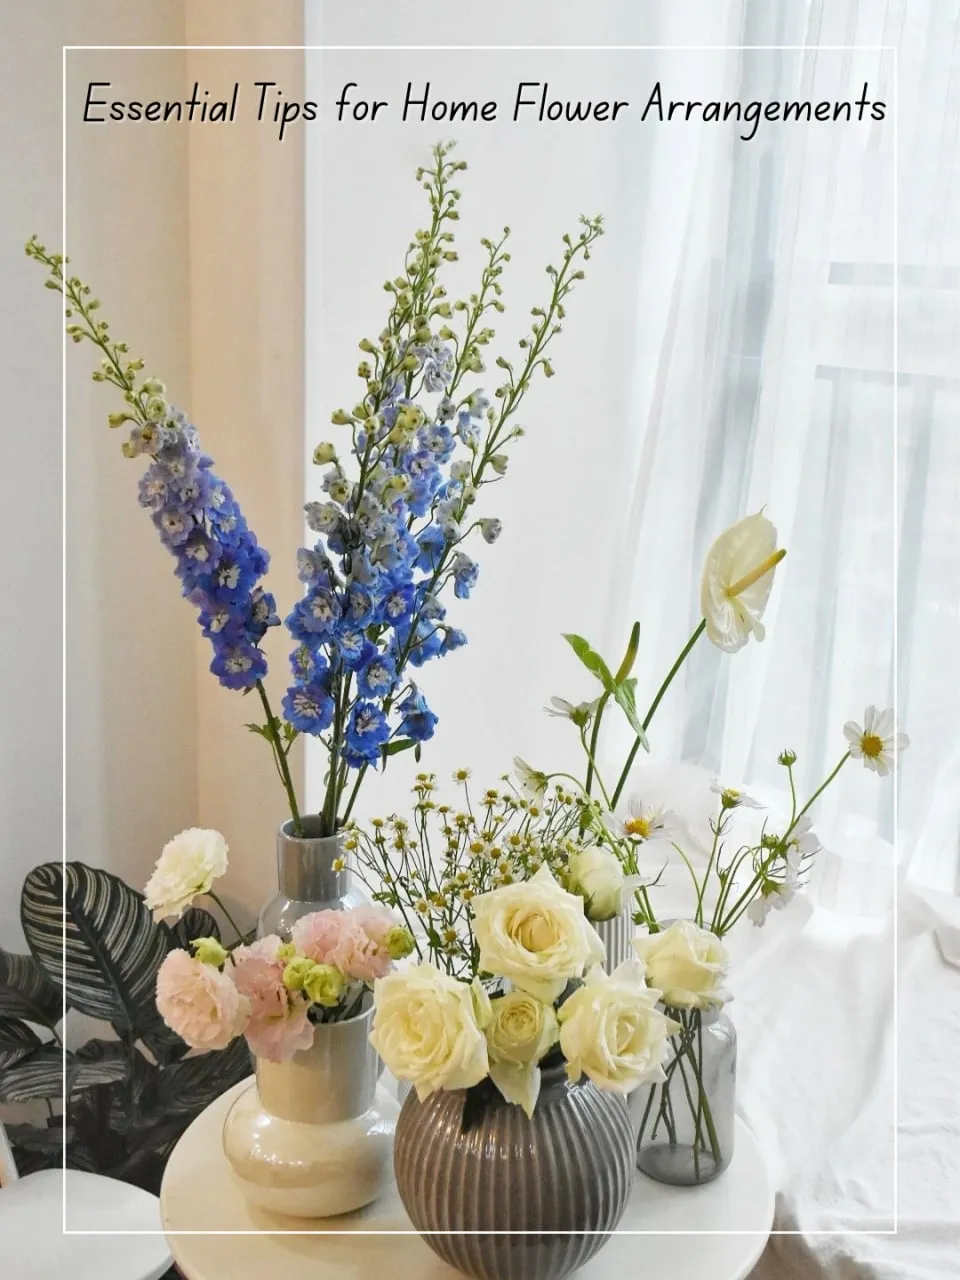 How to Choose the Right Vase for Flowers